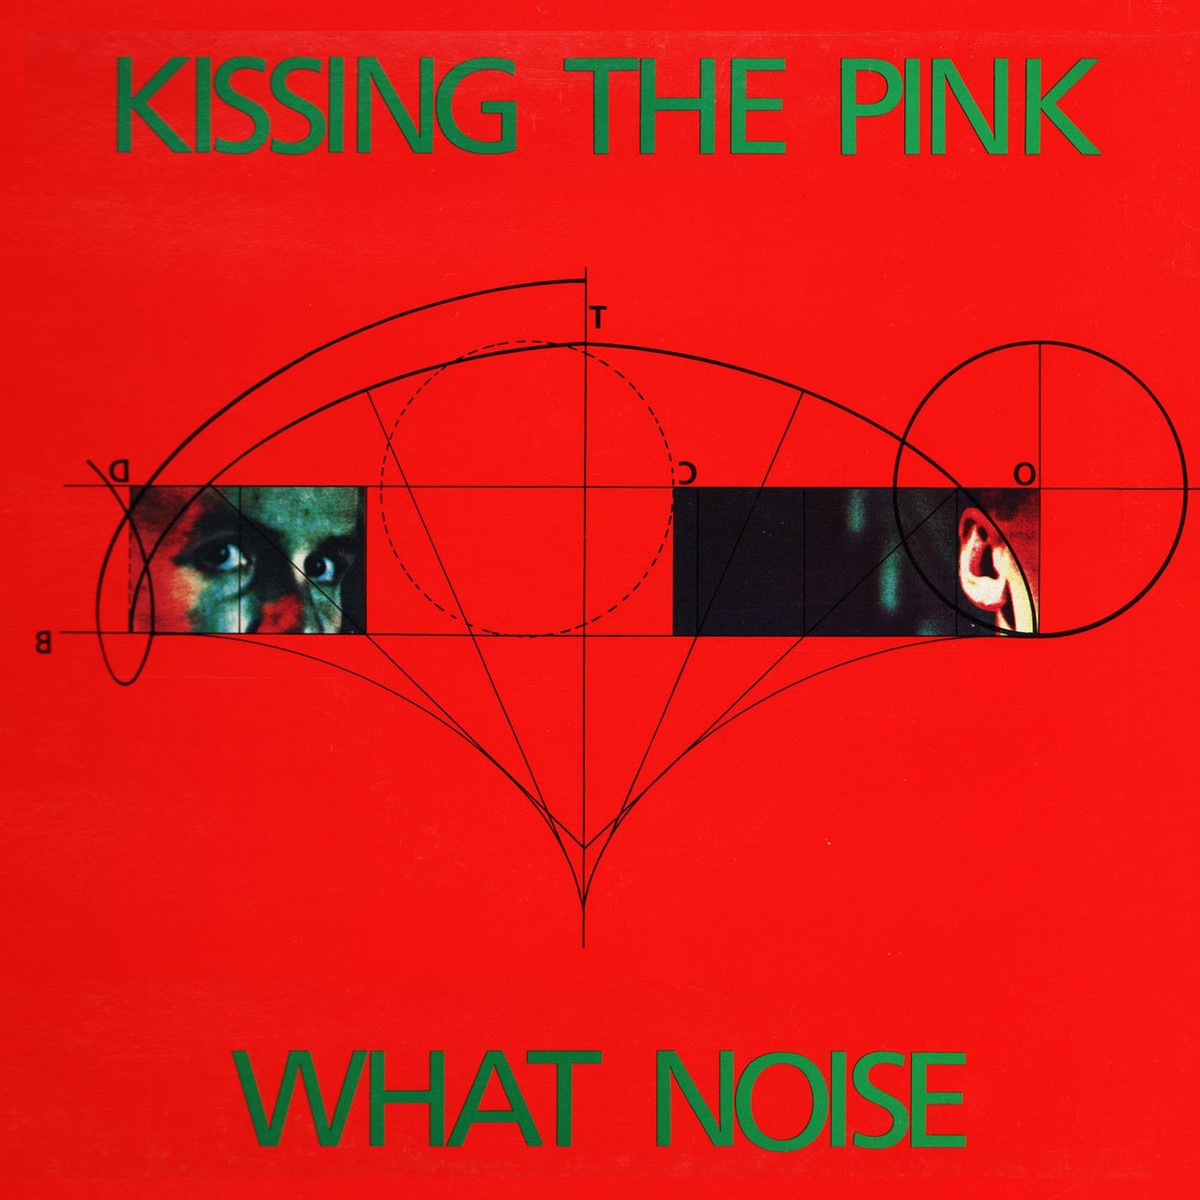 What Noise?